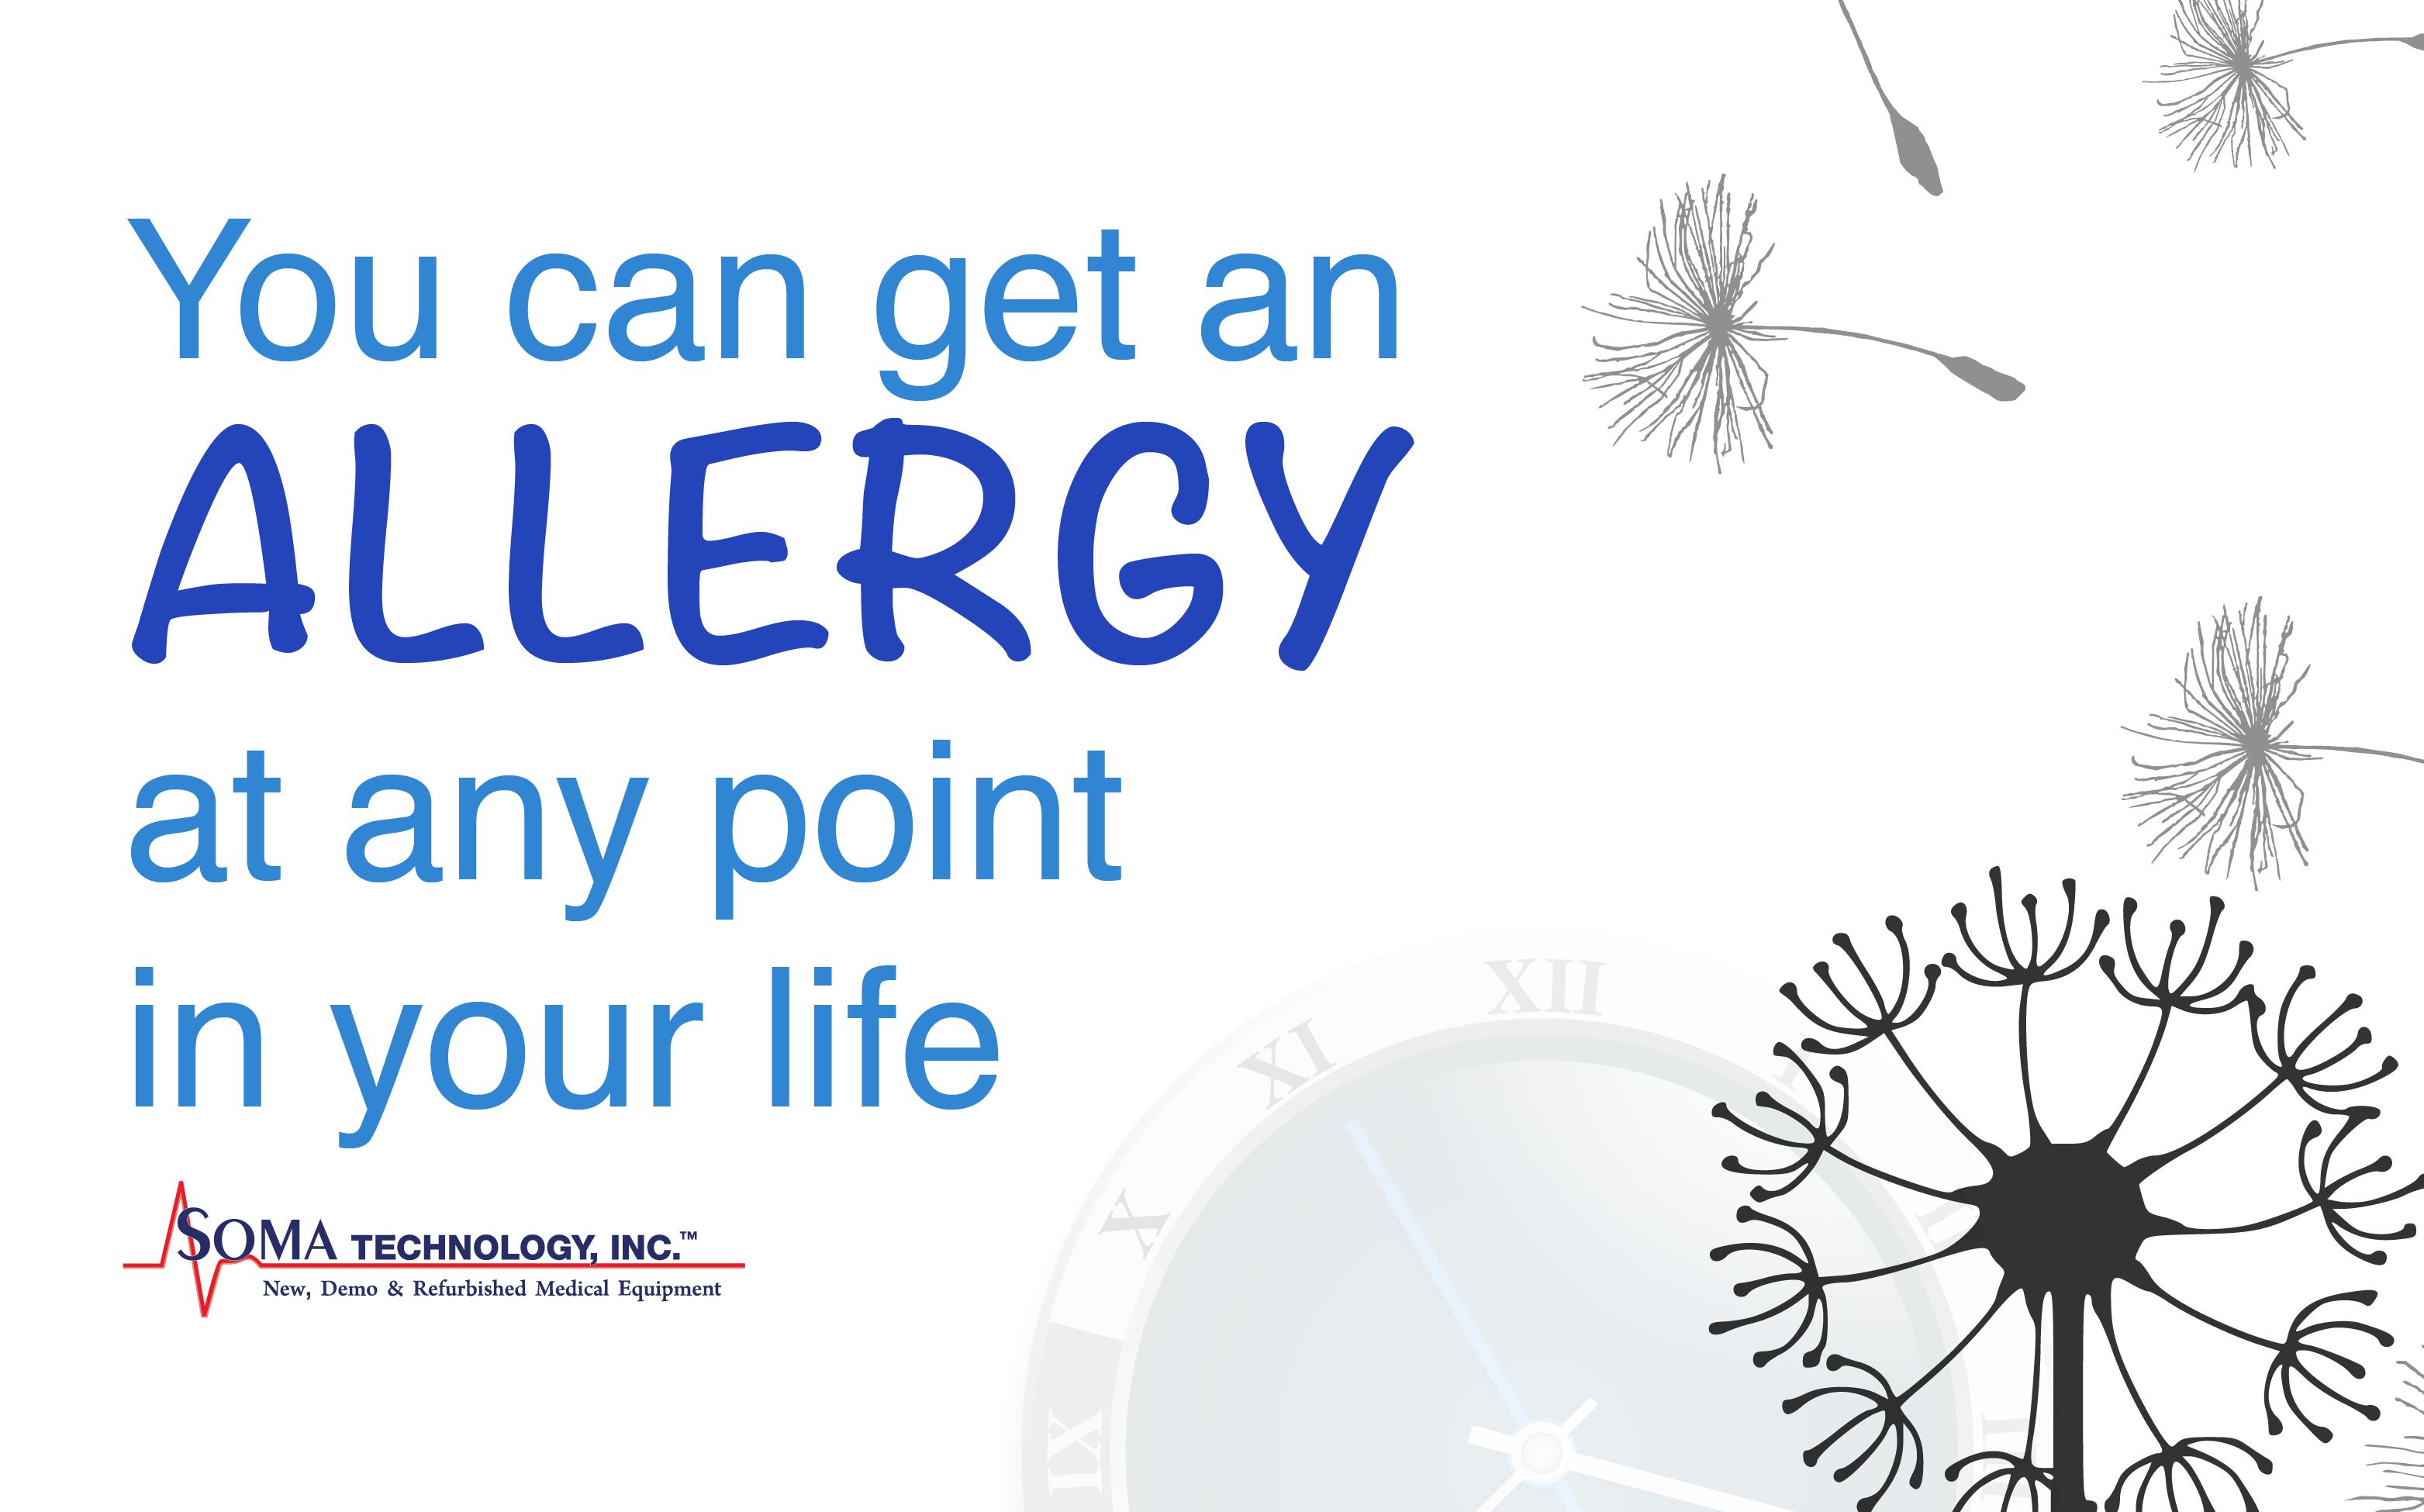 You can get an allergy at any point in your life - Soma Technology, Inc.